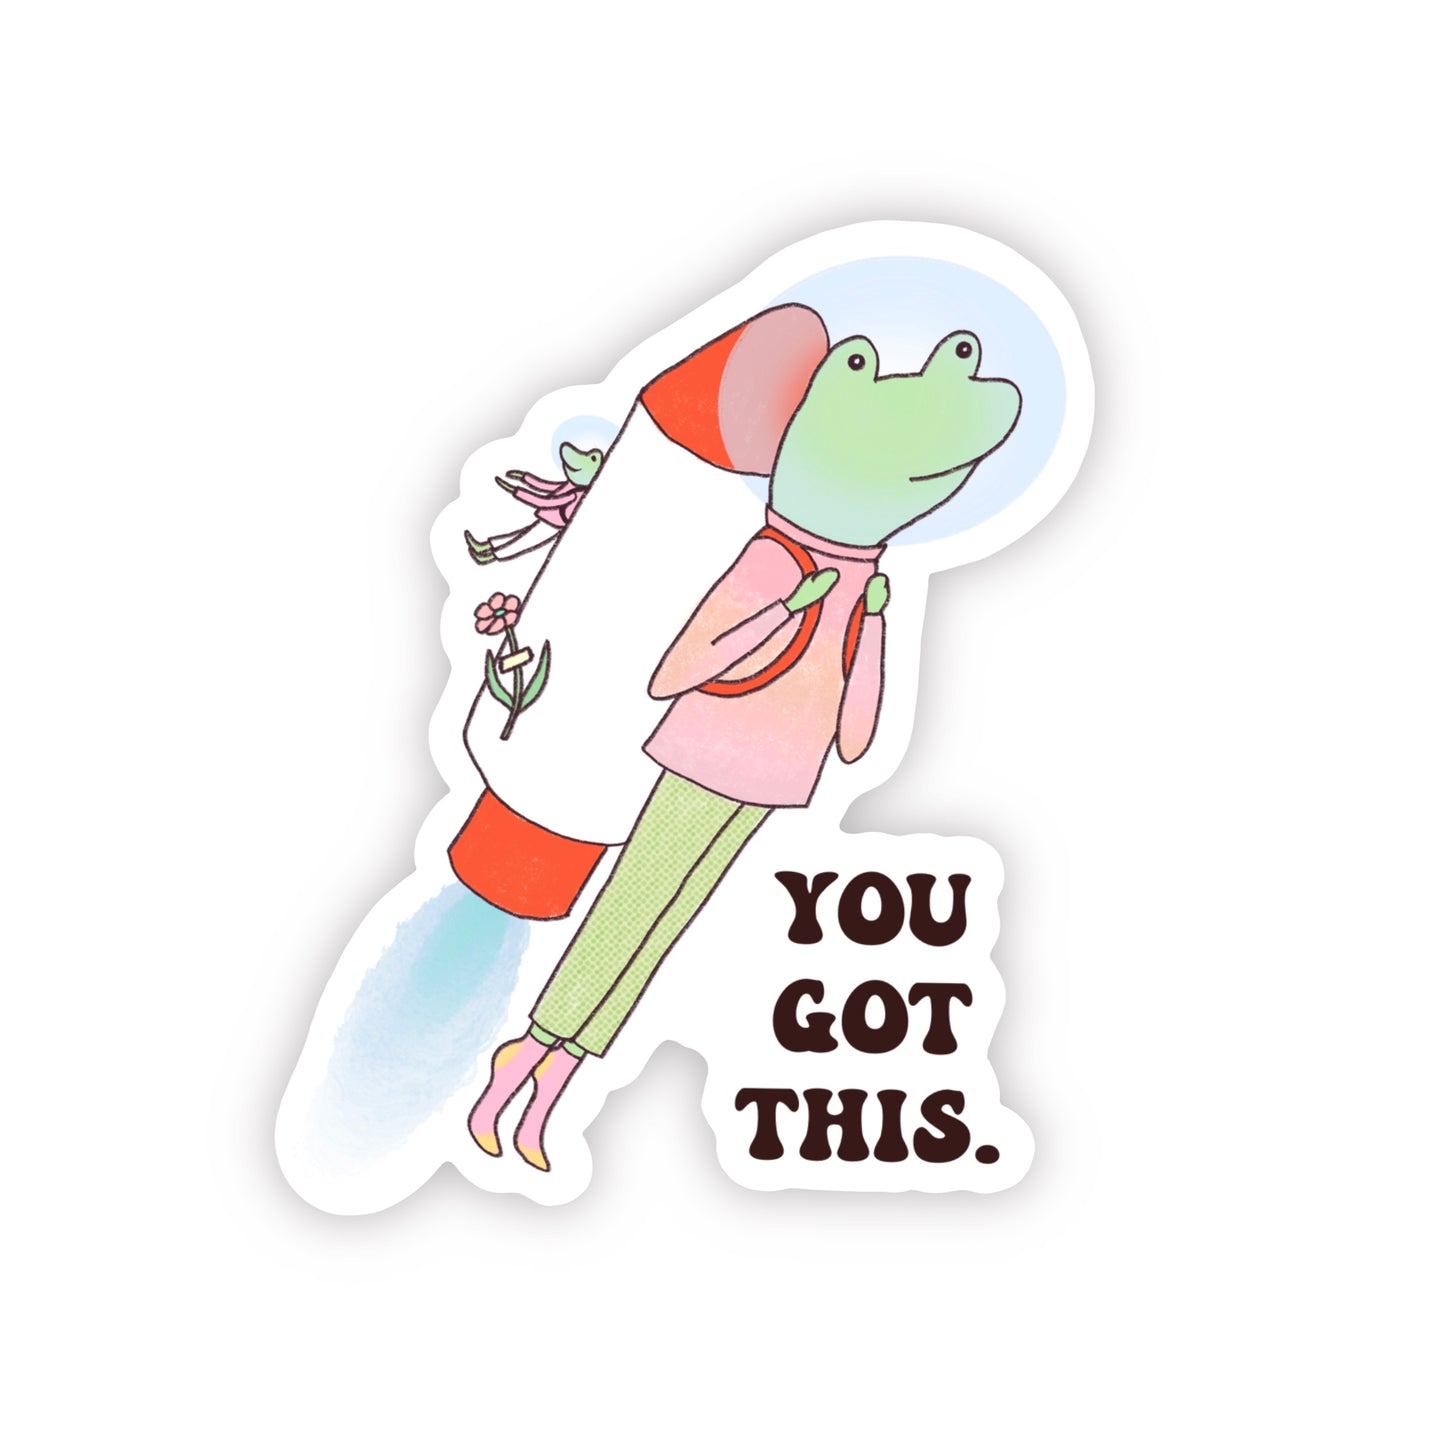 motivational waterproof die cut sticker with frogs who are astronauts